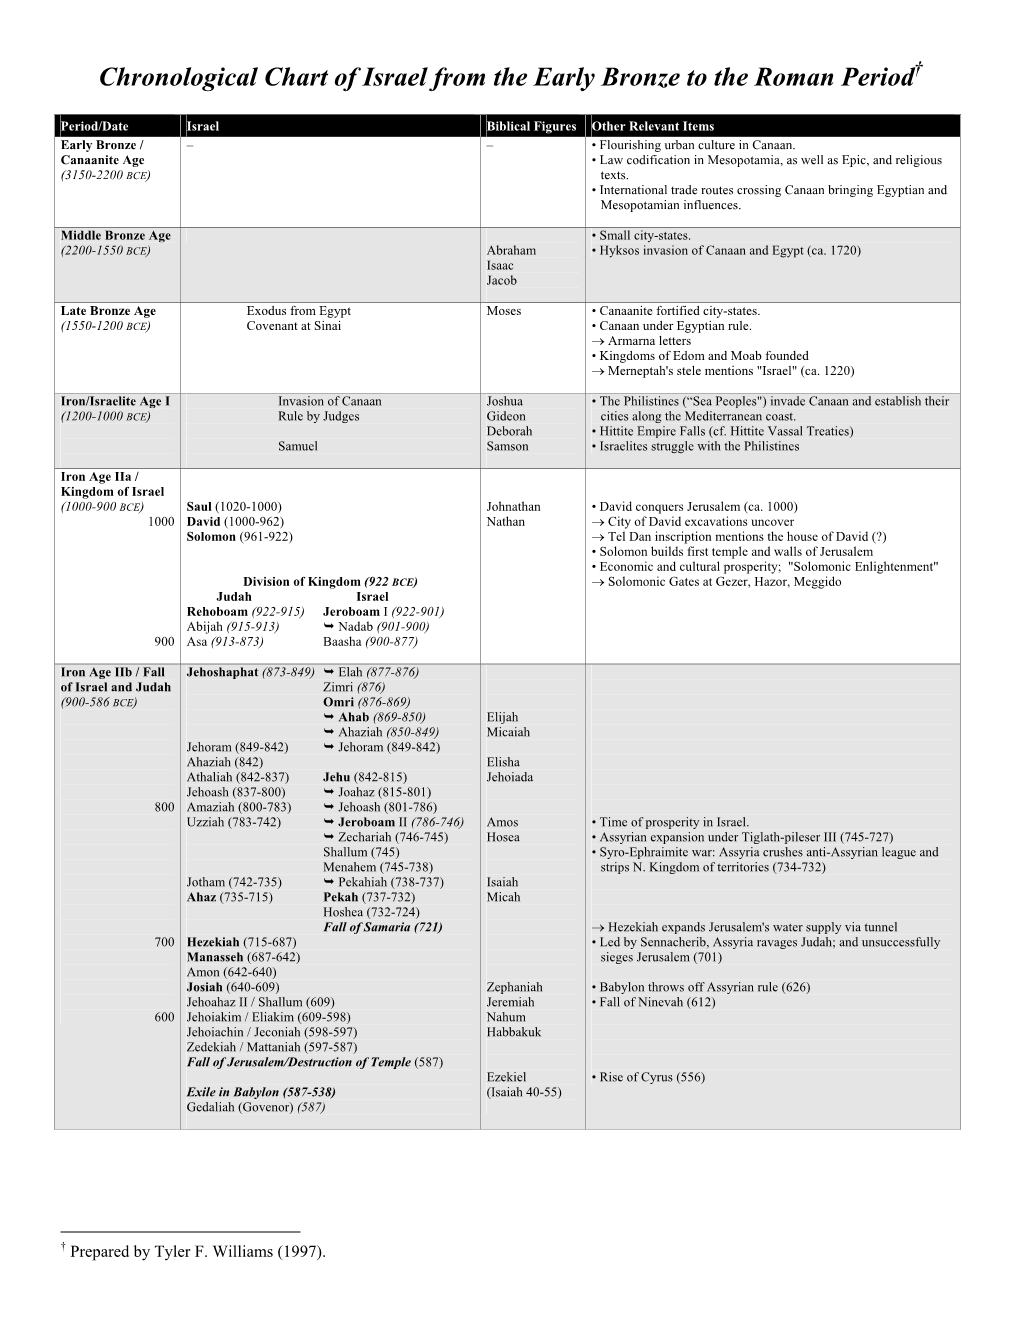 Chronological Table of Israel's History